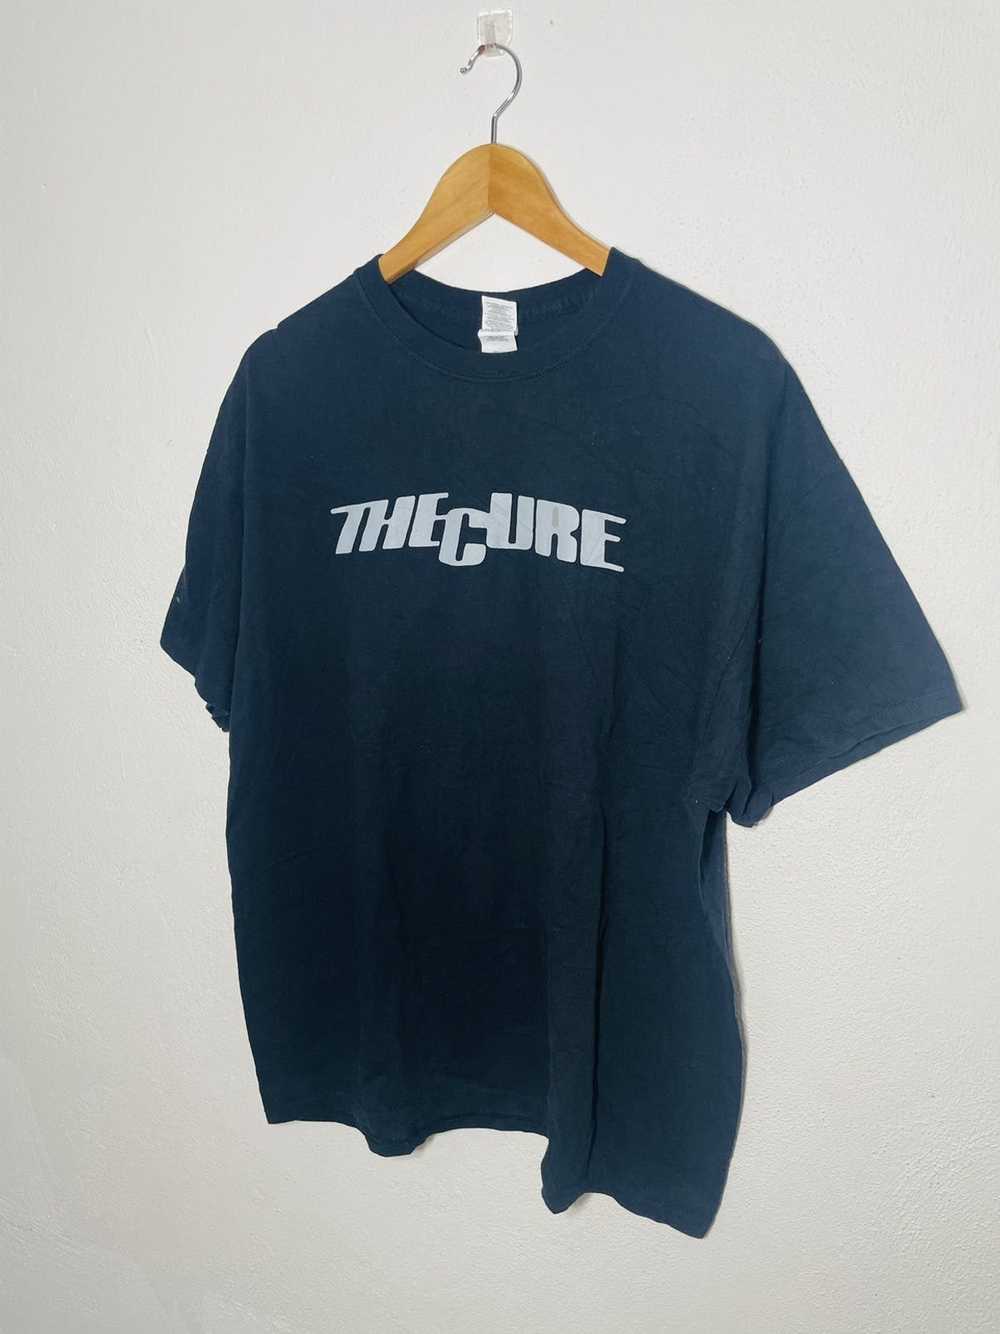 Band Tees × The Cure Rare!! The Cure Band T-Shirt… - image 3